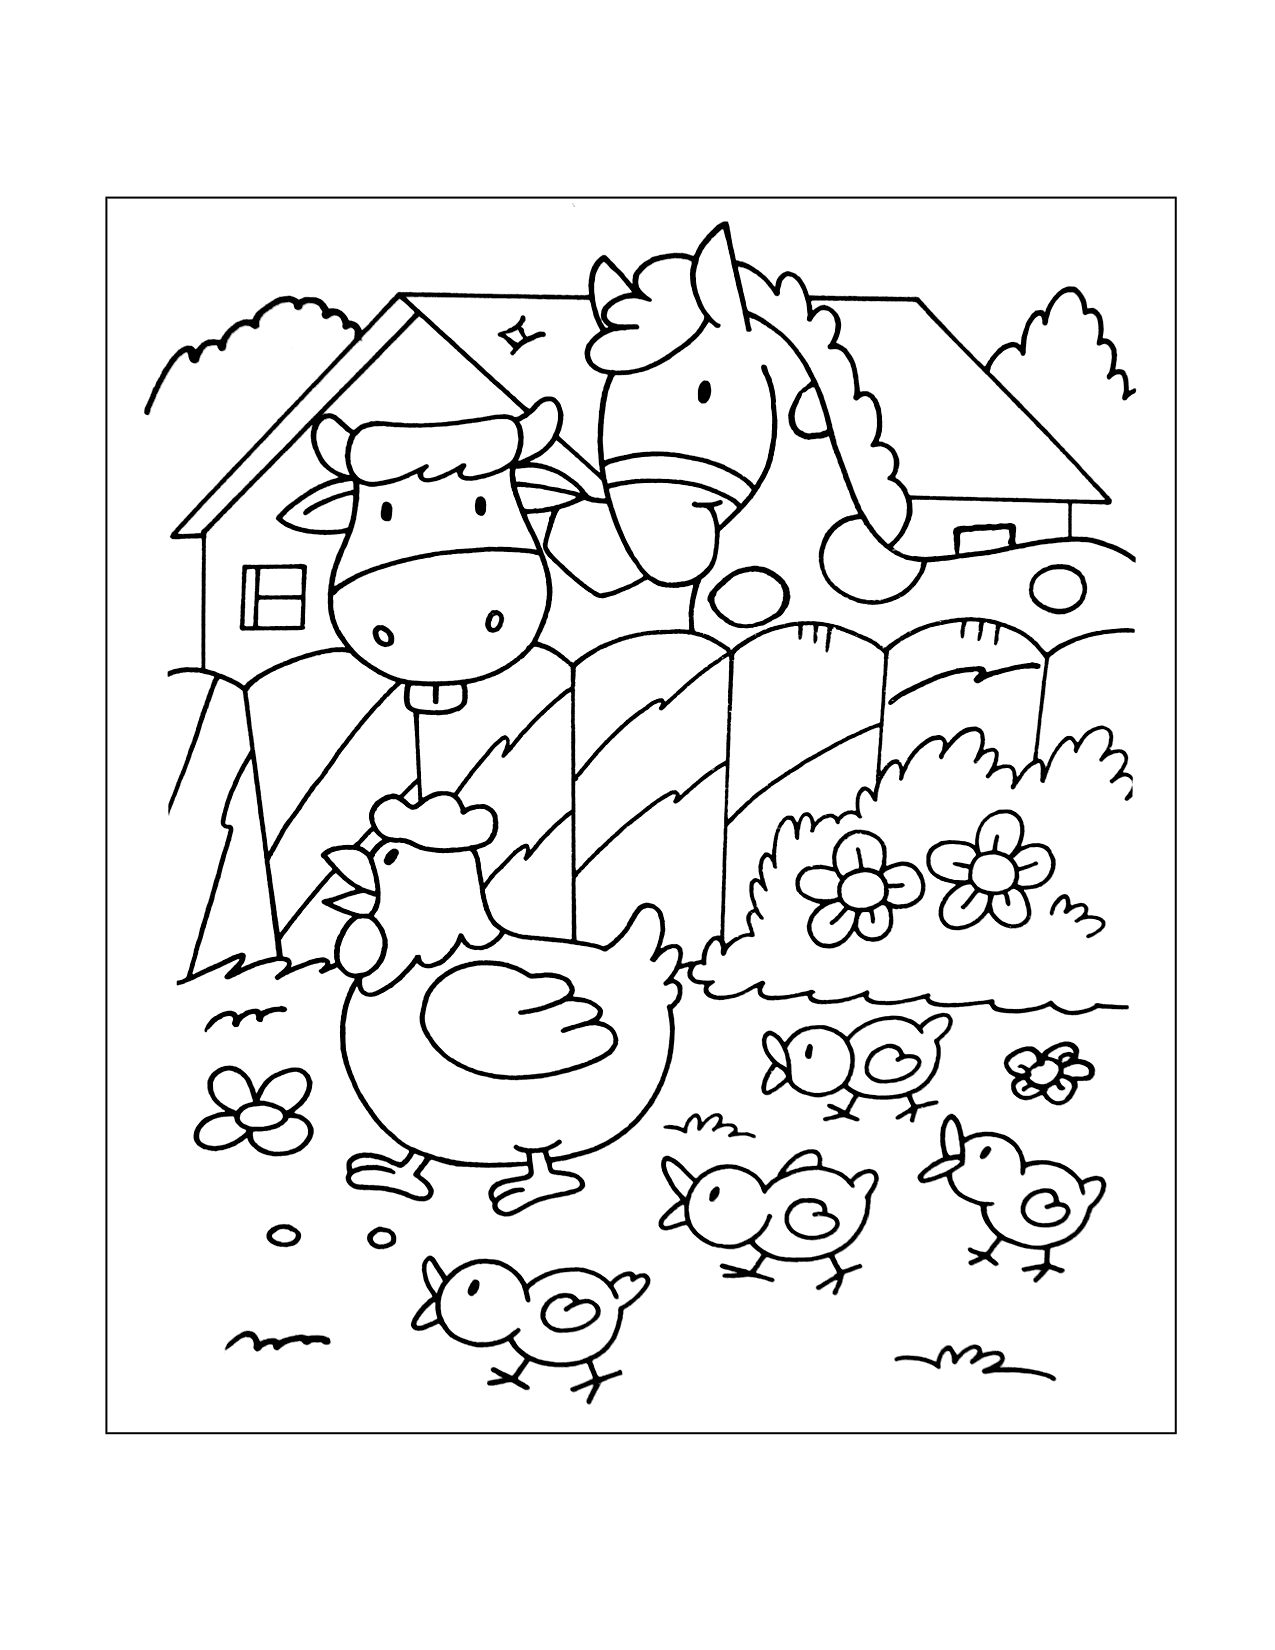 Horse And Cow And Chickens Coloring Page